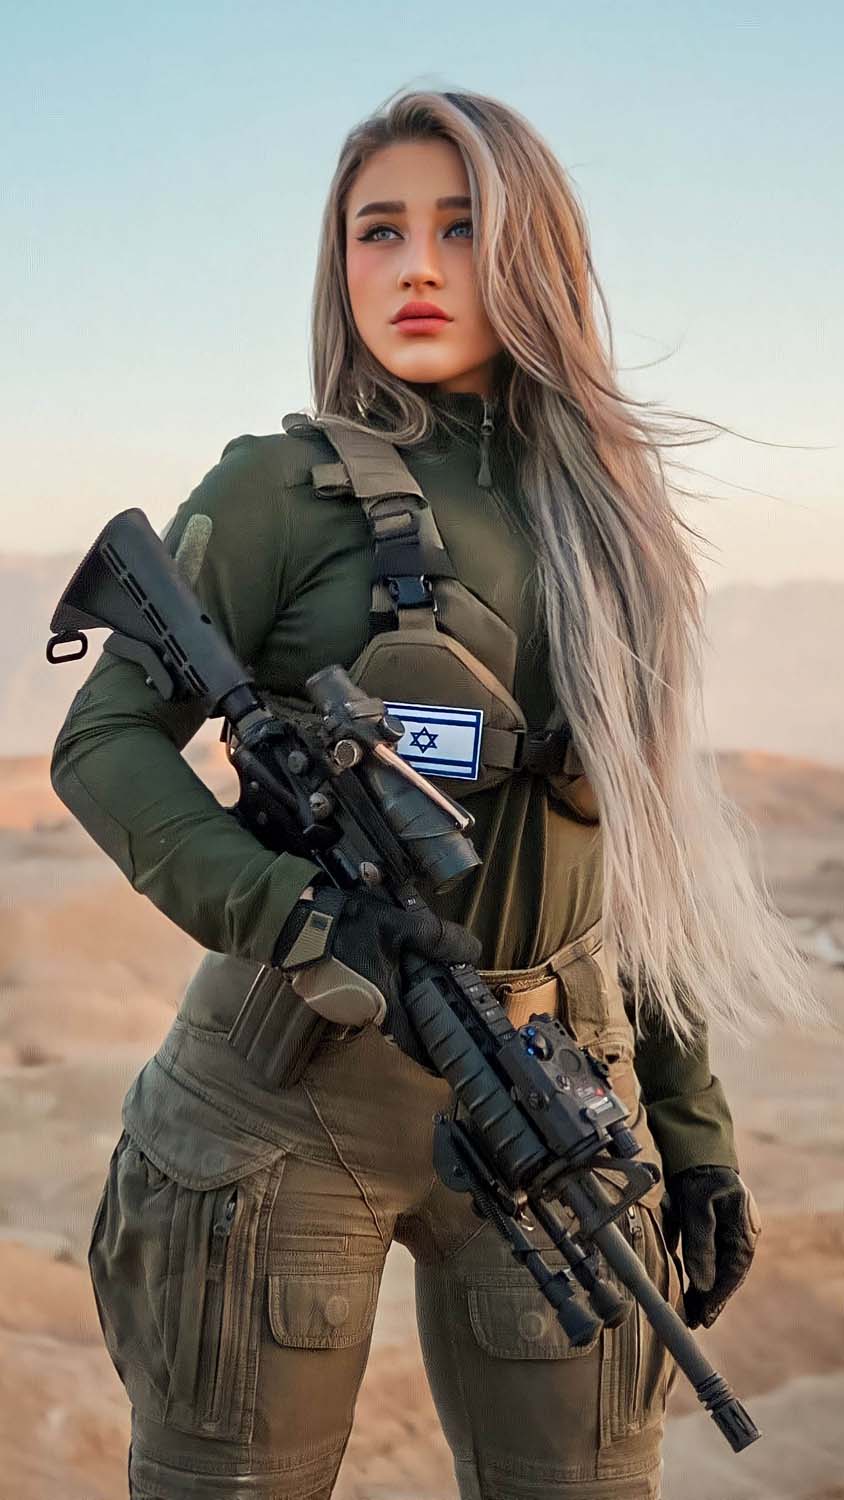 Special Forces Girl IPhone Wallpaper HD - IPhone Wallpapers : iPhone  Wallpapers